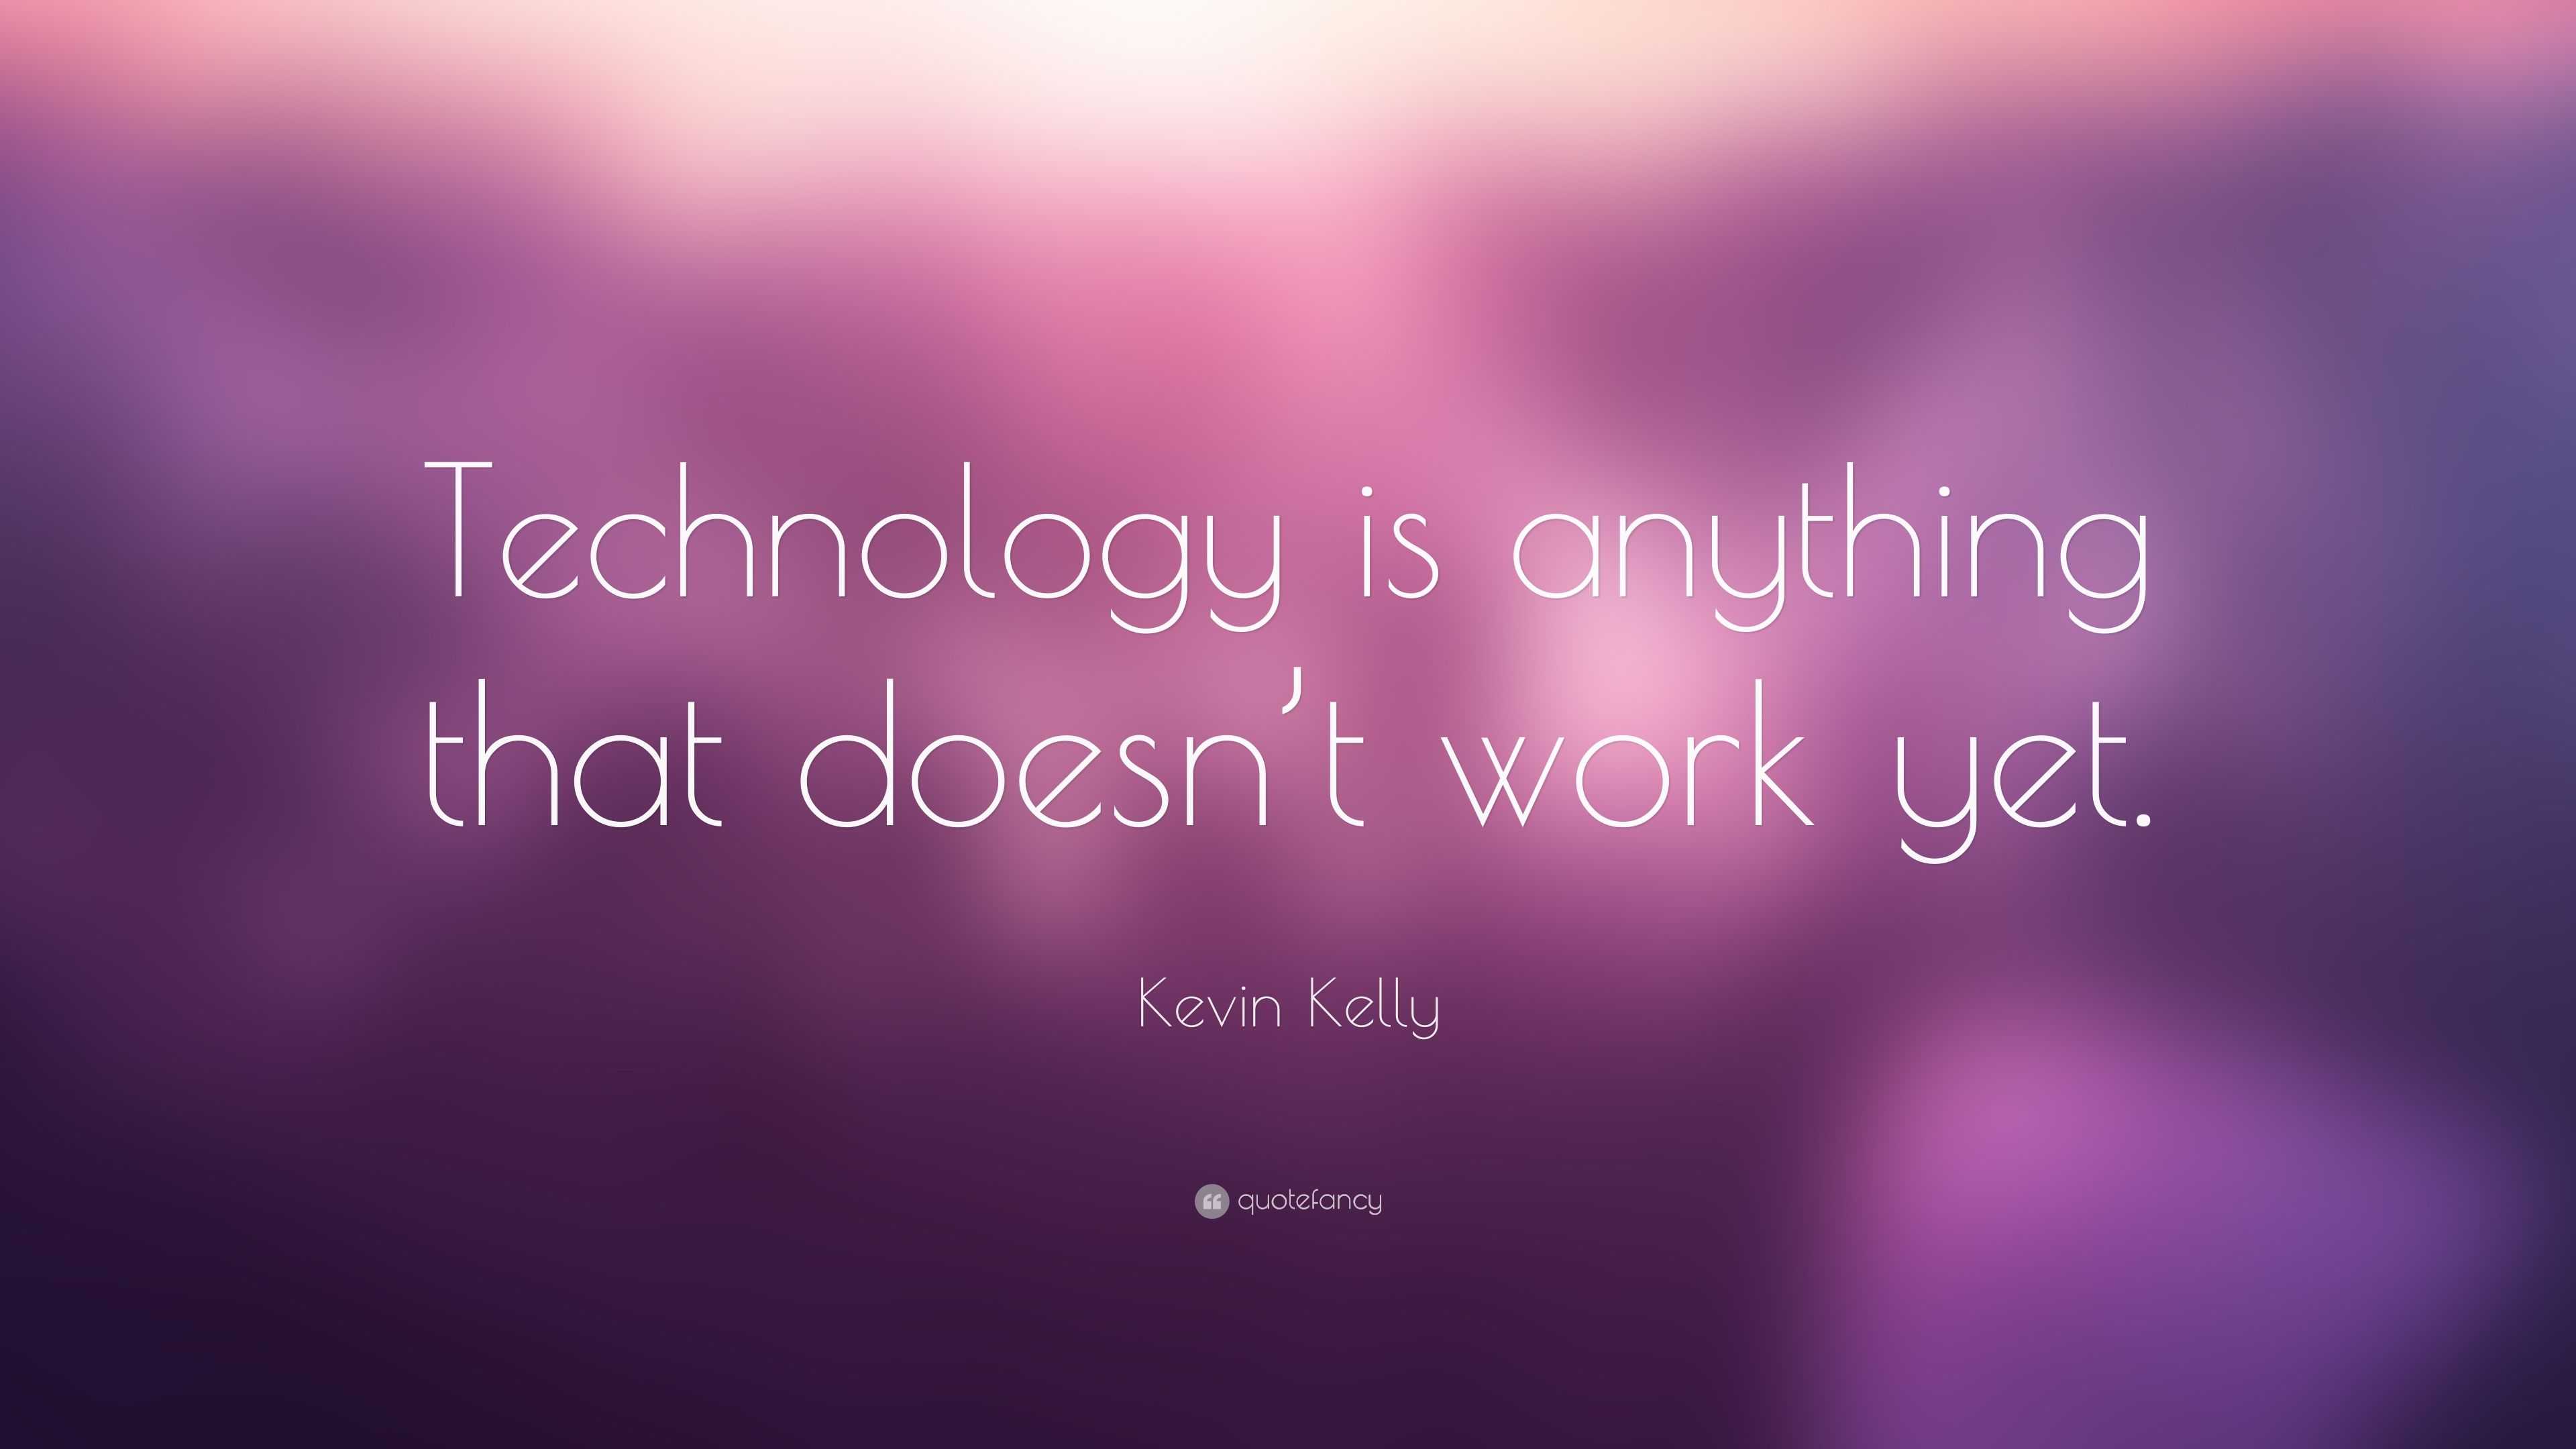 Kevin Kelly Quote: “Technology is anything that doesn’t work yet.”